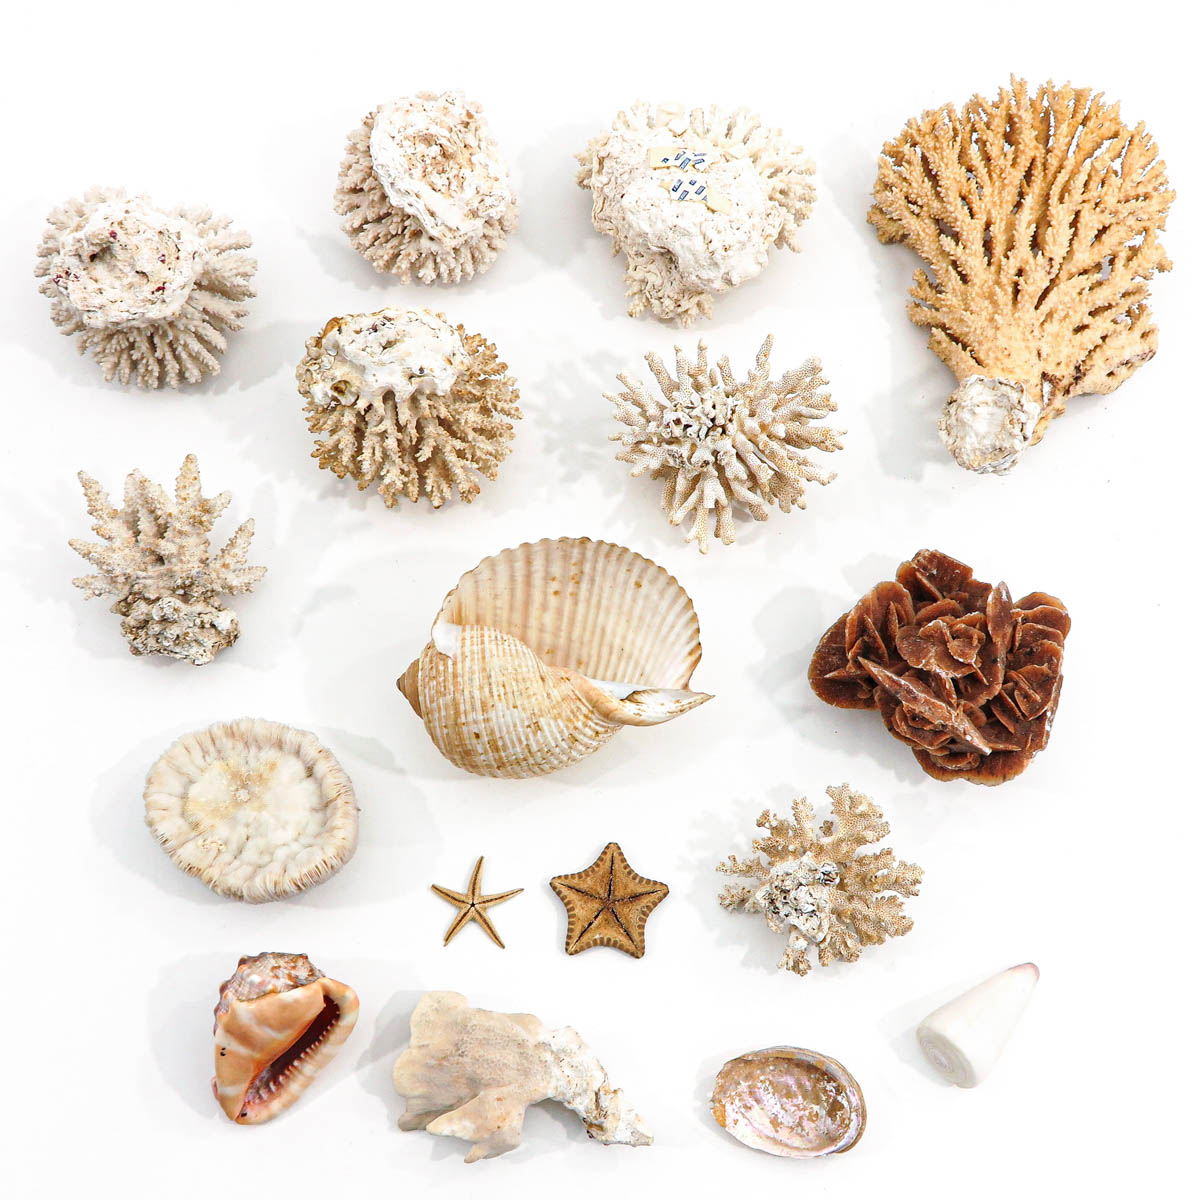 A Collection of Shells and Coral - Image 2 of 6